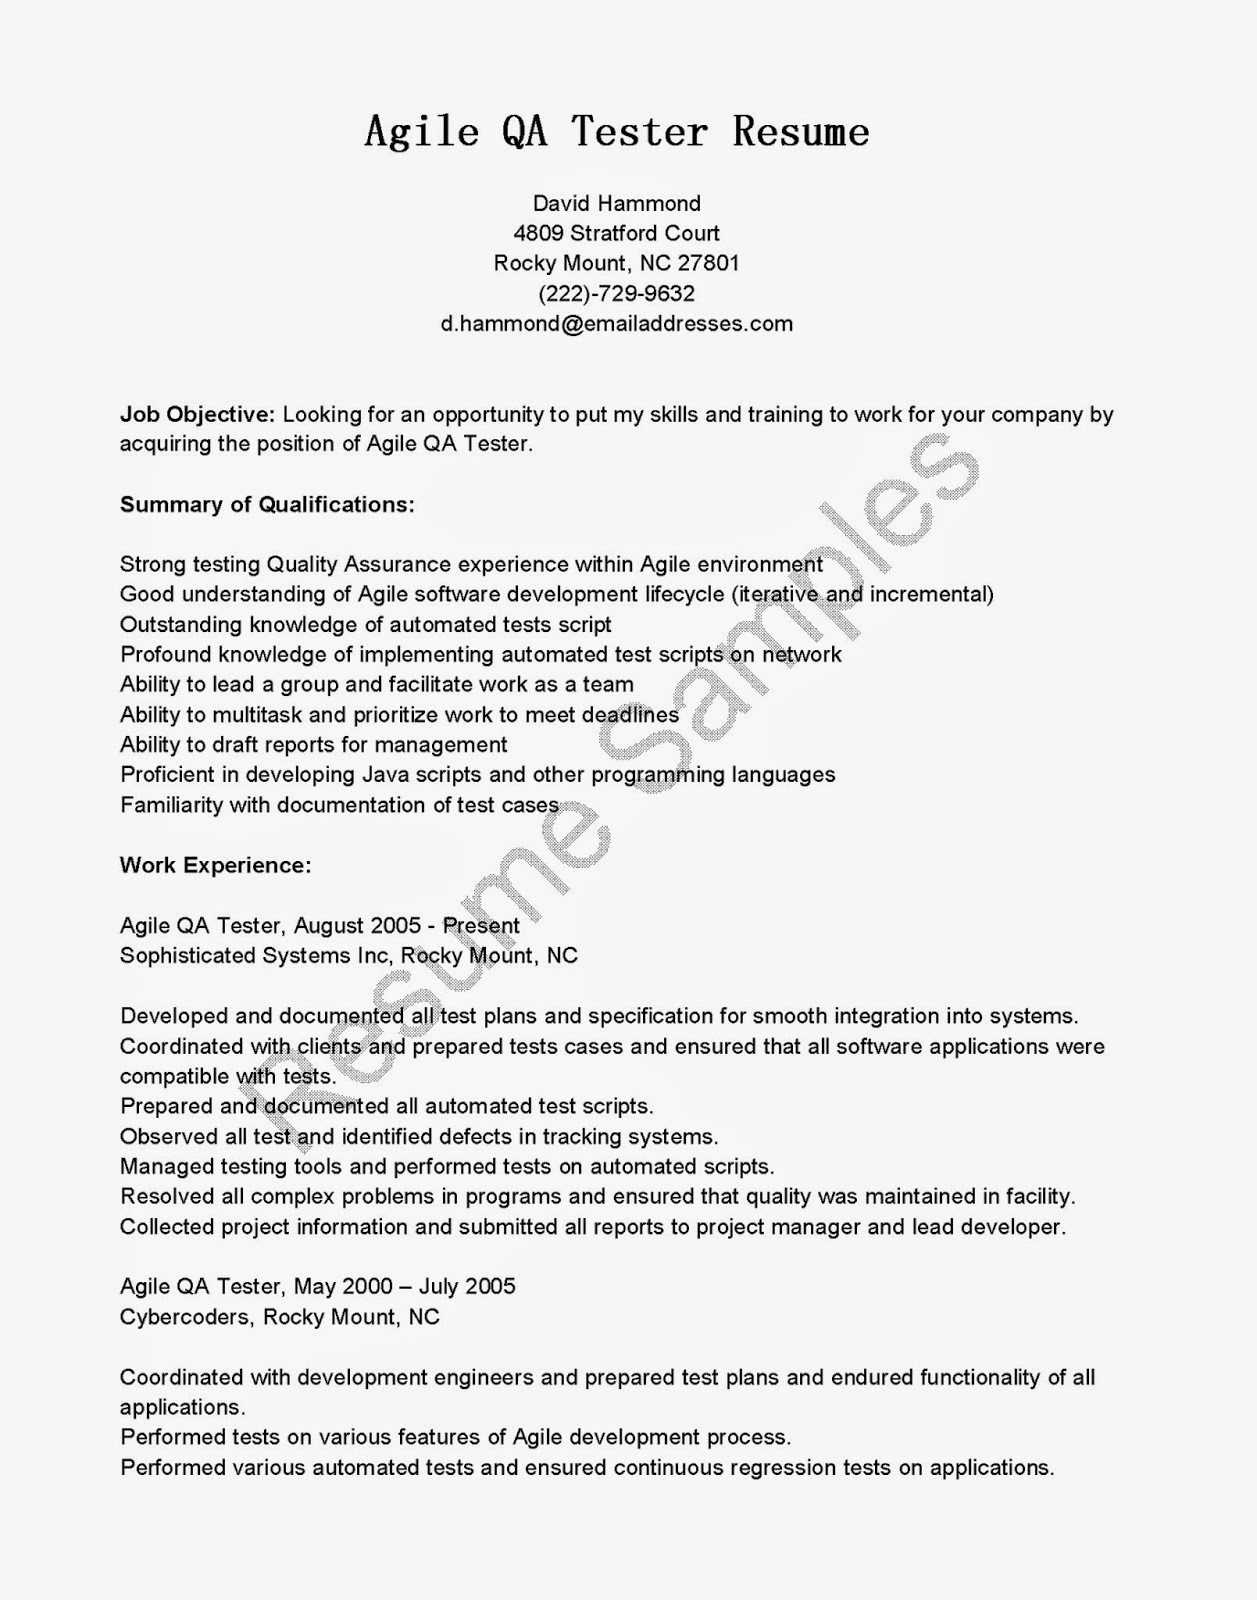 Sample Qa Resume with Agile Experience Agile software Tester Resume October 2021